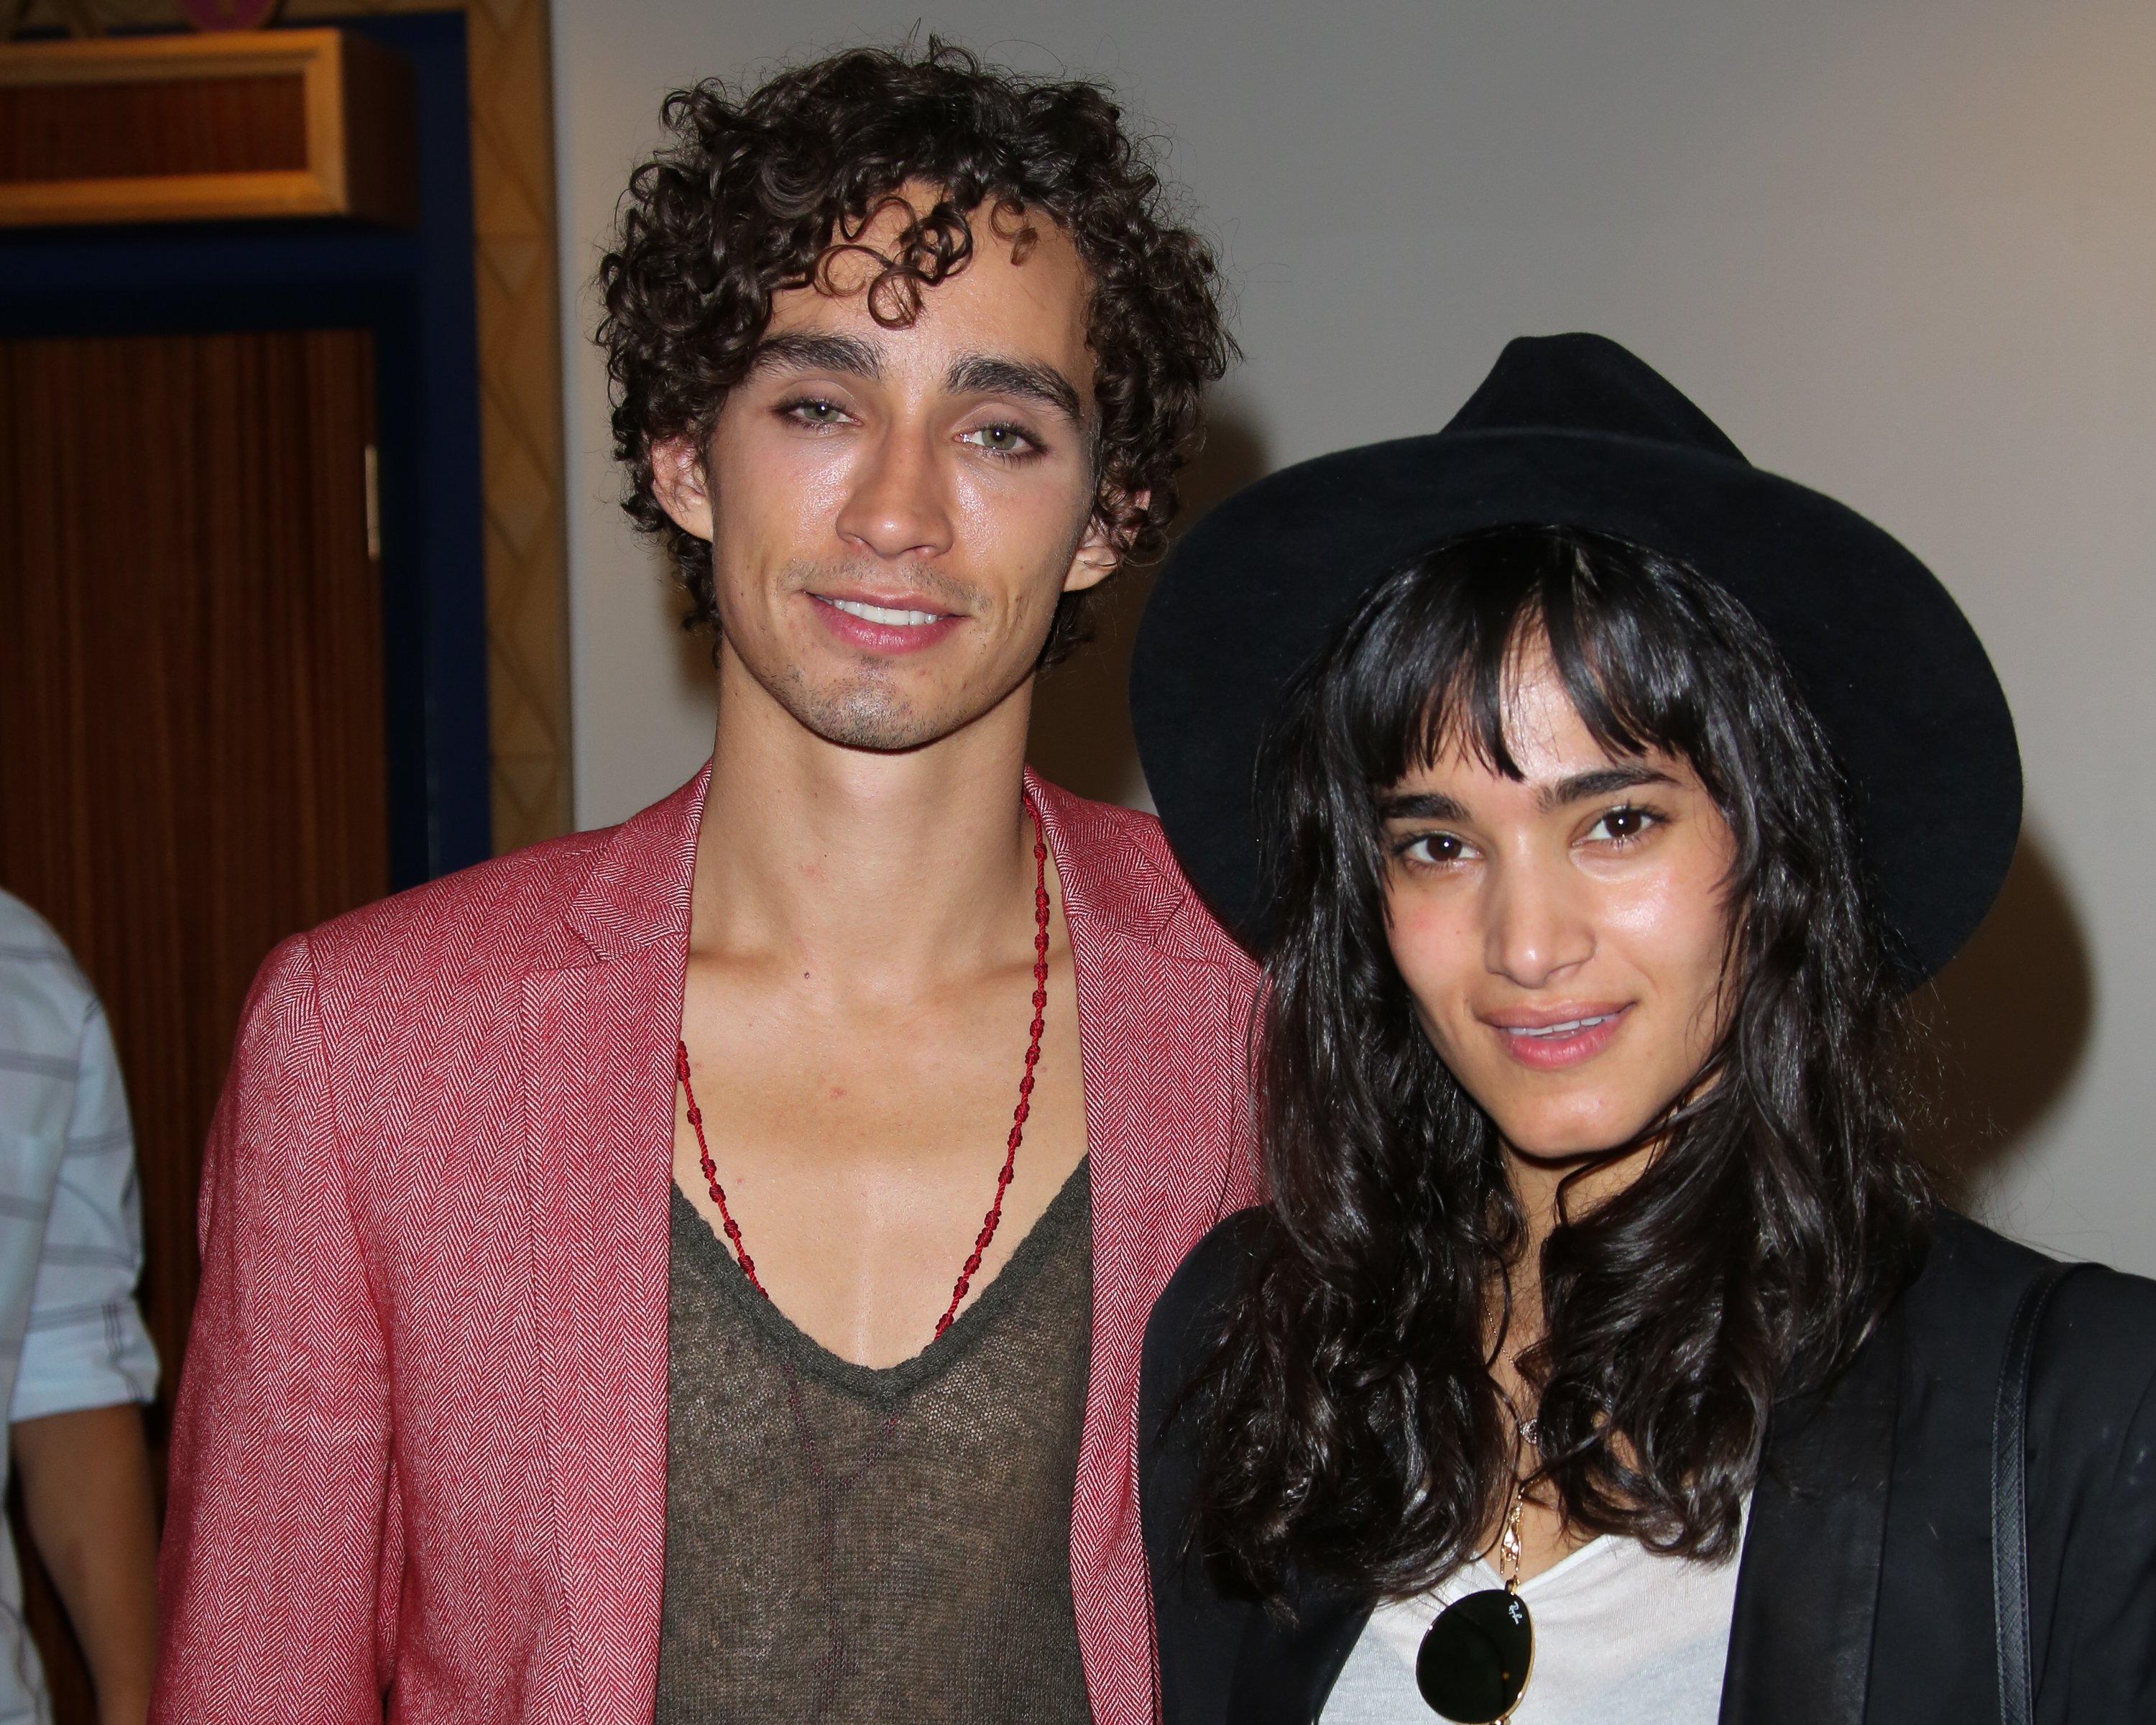 Robert Sheehan and Sofia Boutella attend the premiere of "The Road Within" at the 2014 Los Angeles Film Festival at Regal Cinemas L.A. Live on June 18, 2014, in Los Angeles, California. | Source: Getty Images